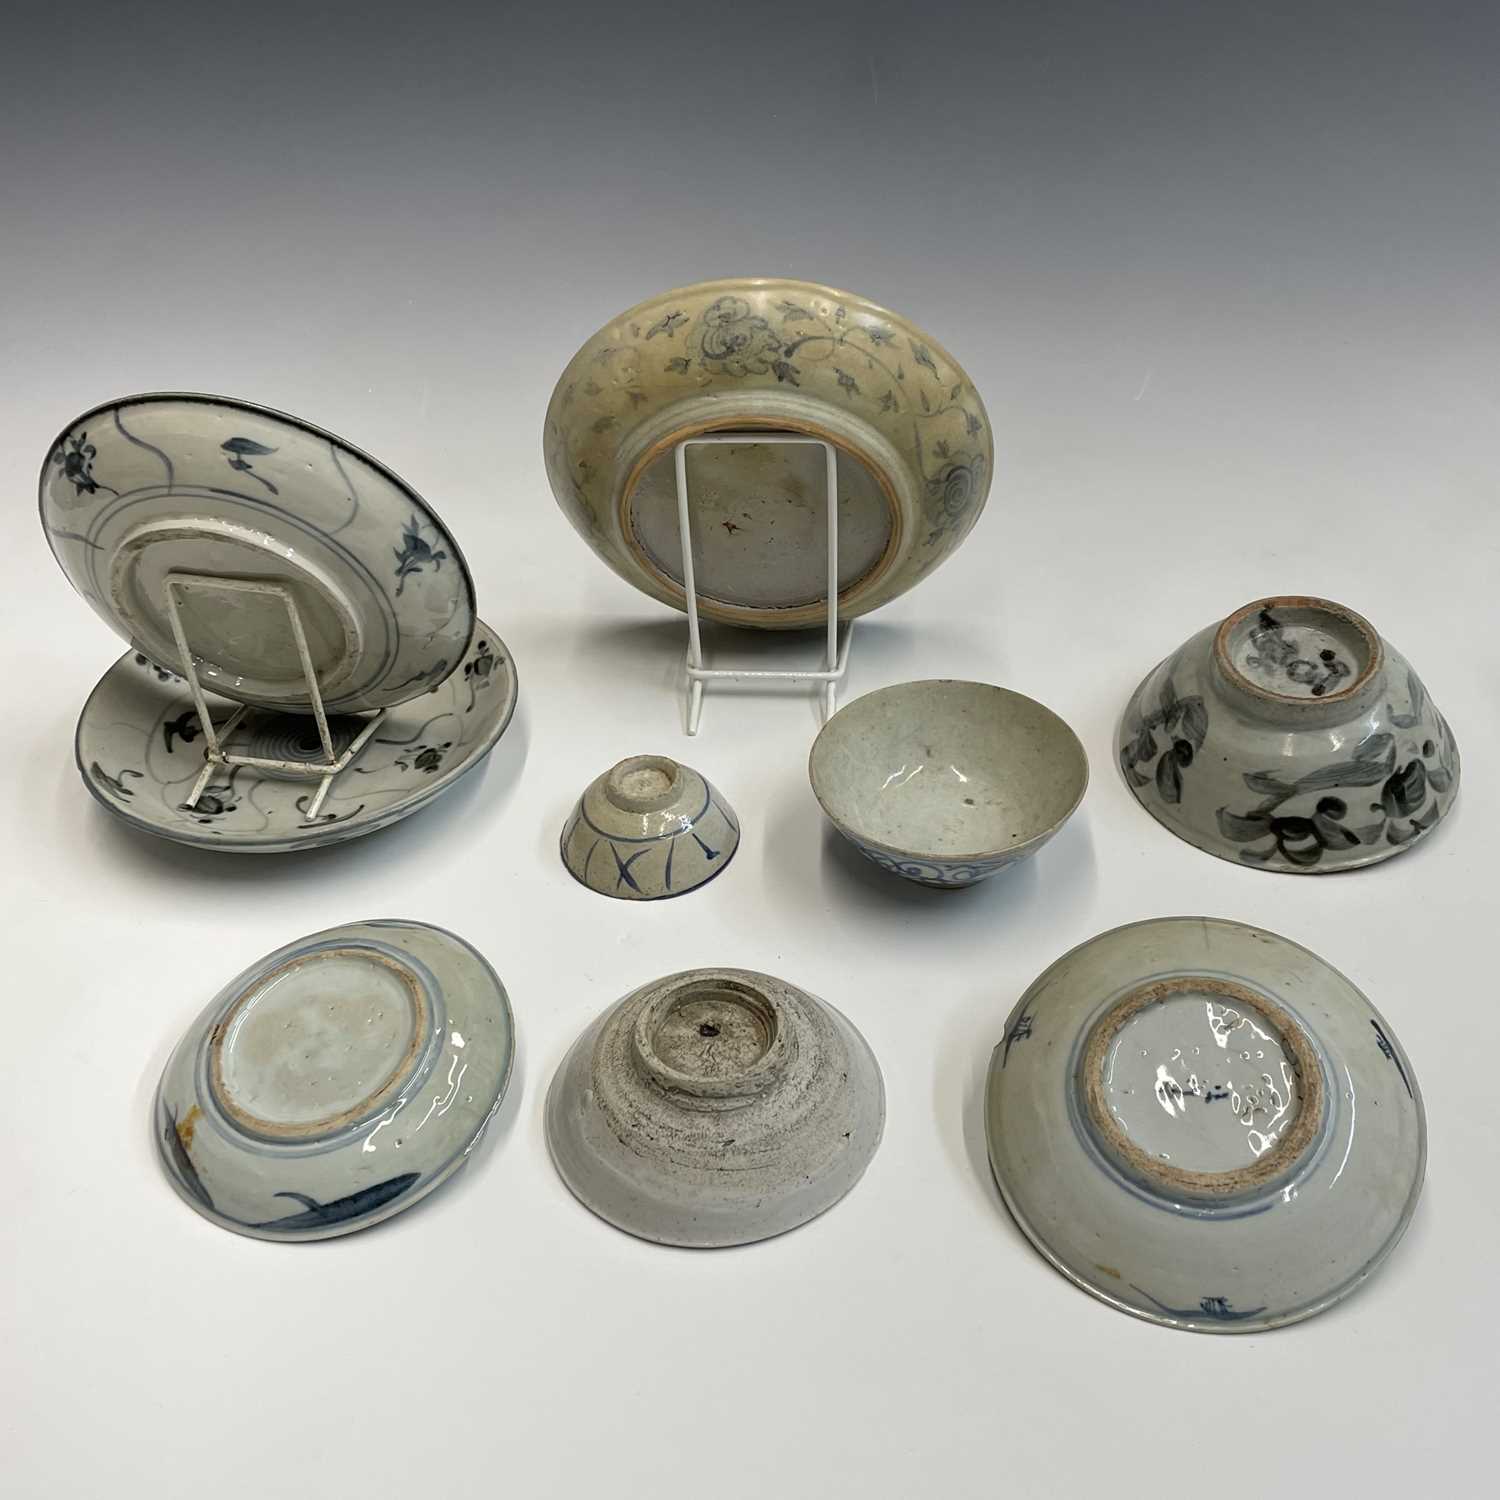 A selection of Chinese provincial pottery bowls and plates, Ming Dynasty, largest dish diameter 19. - Image 3 of 20